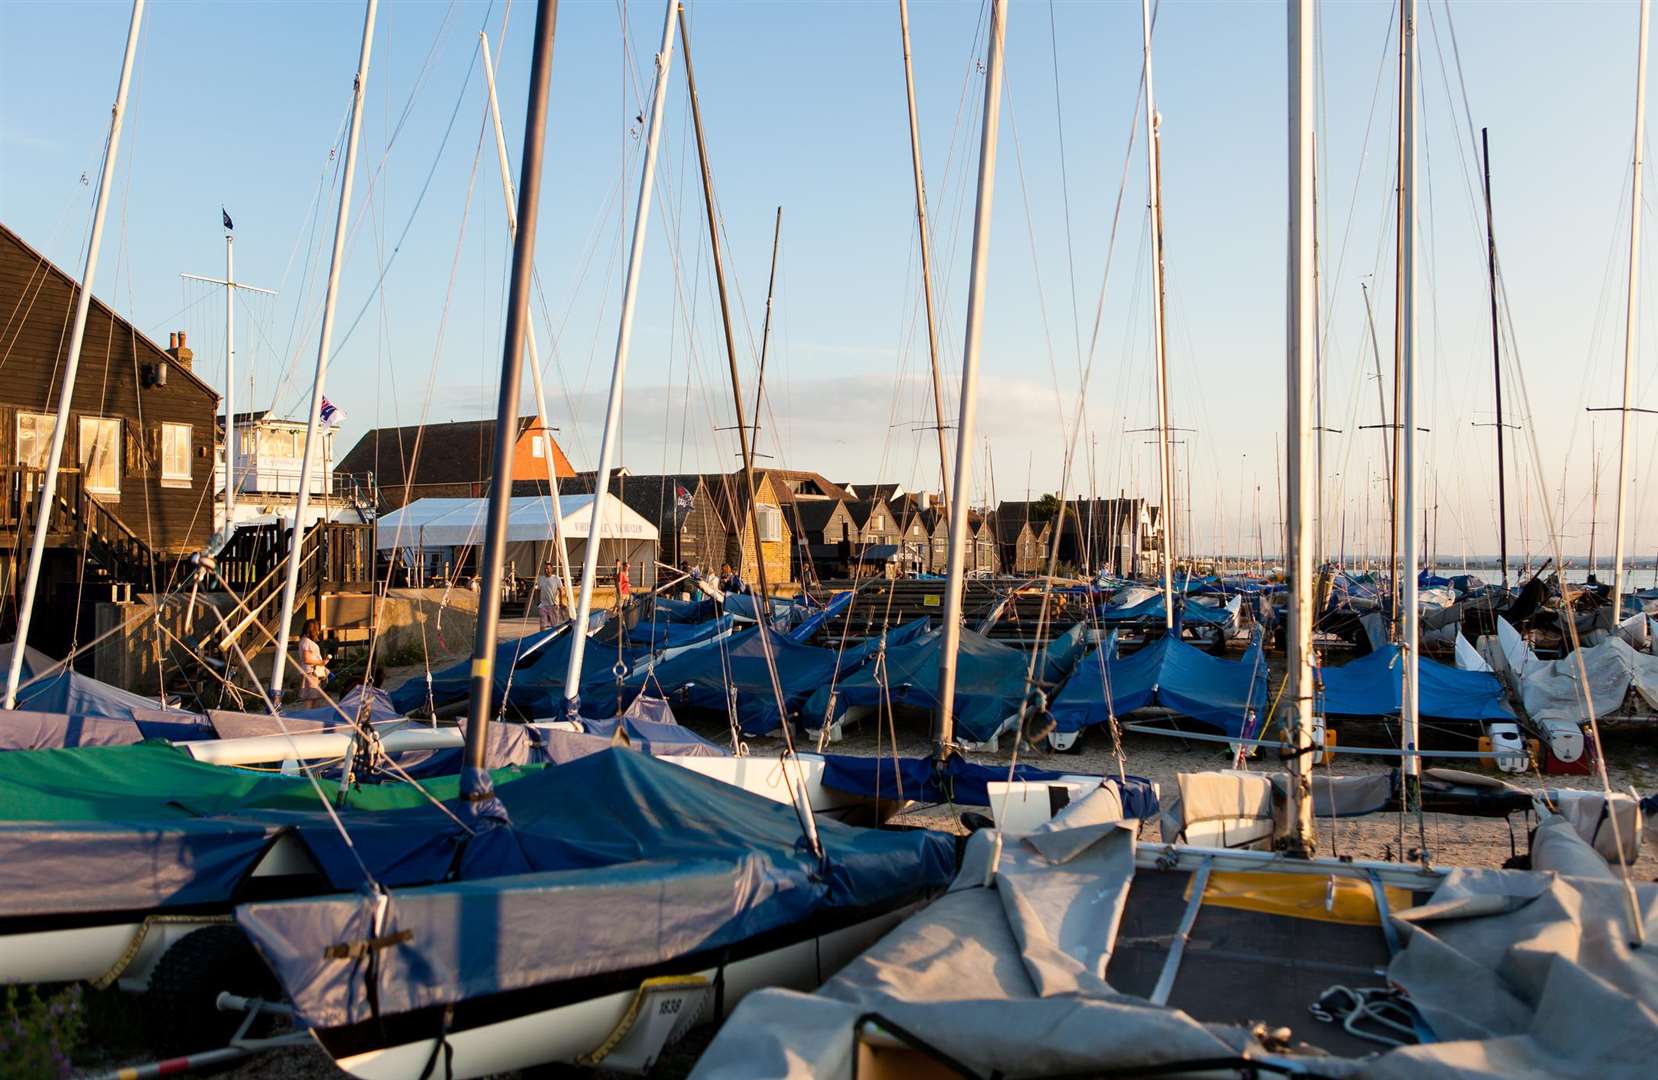 Whitstable's restaurants and venues will open their doors for the second food festival